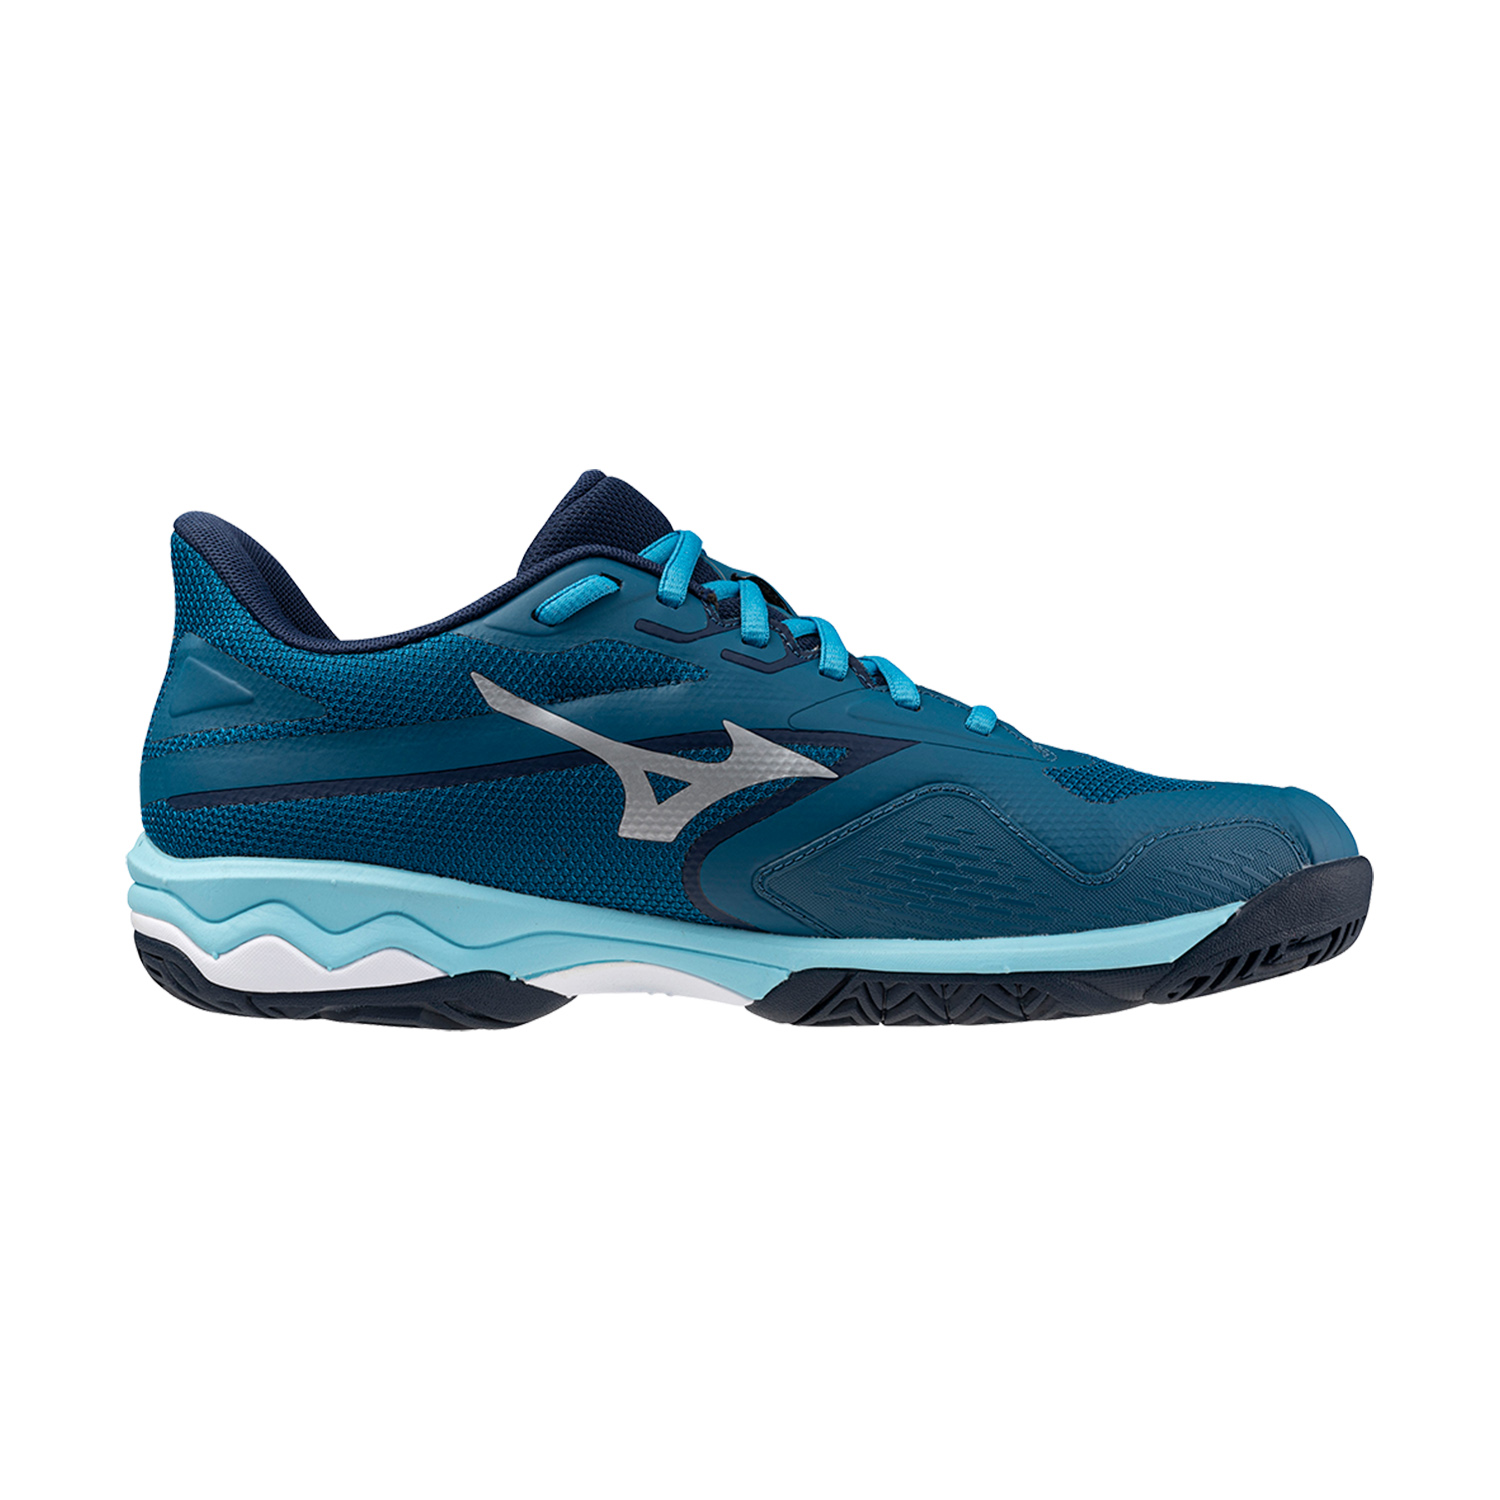 Mizuno Wave Exceed Light 2 All Court - Moroccan Blue/White/Bluejay